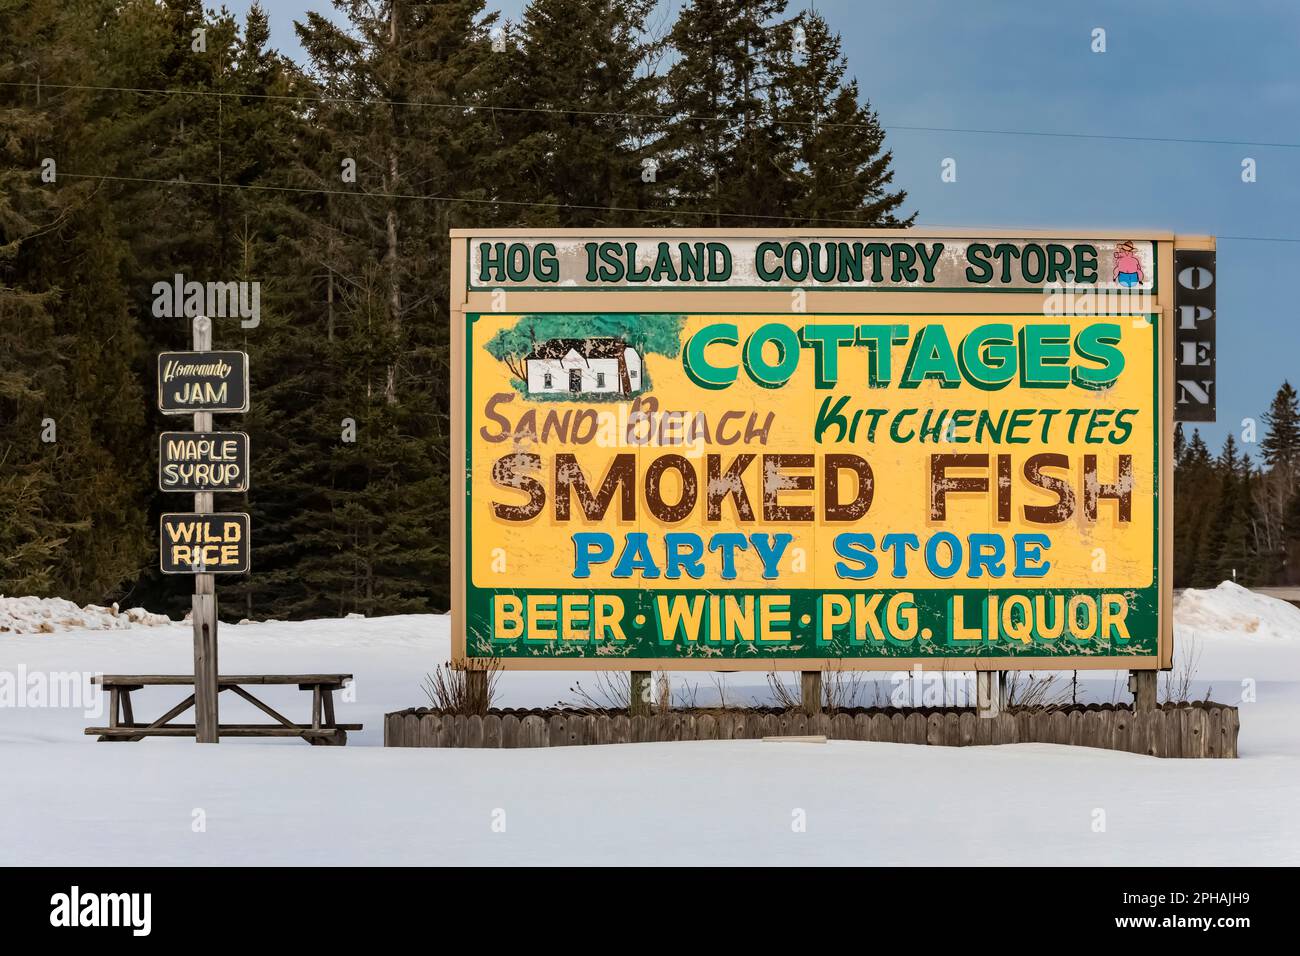 Sign for harming cottages at Hog Island Country Store along U.S. 2 in the Upper Peninsula, Michigan, USA [No property release; editorial licensing onl Stock Photo